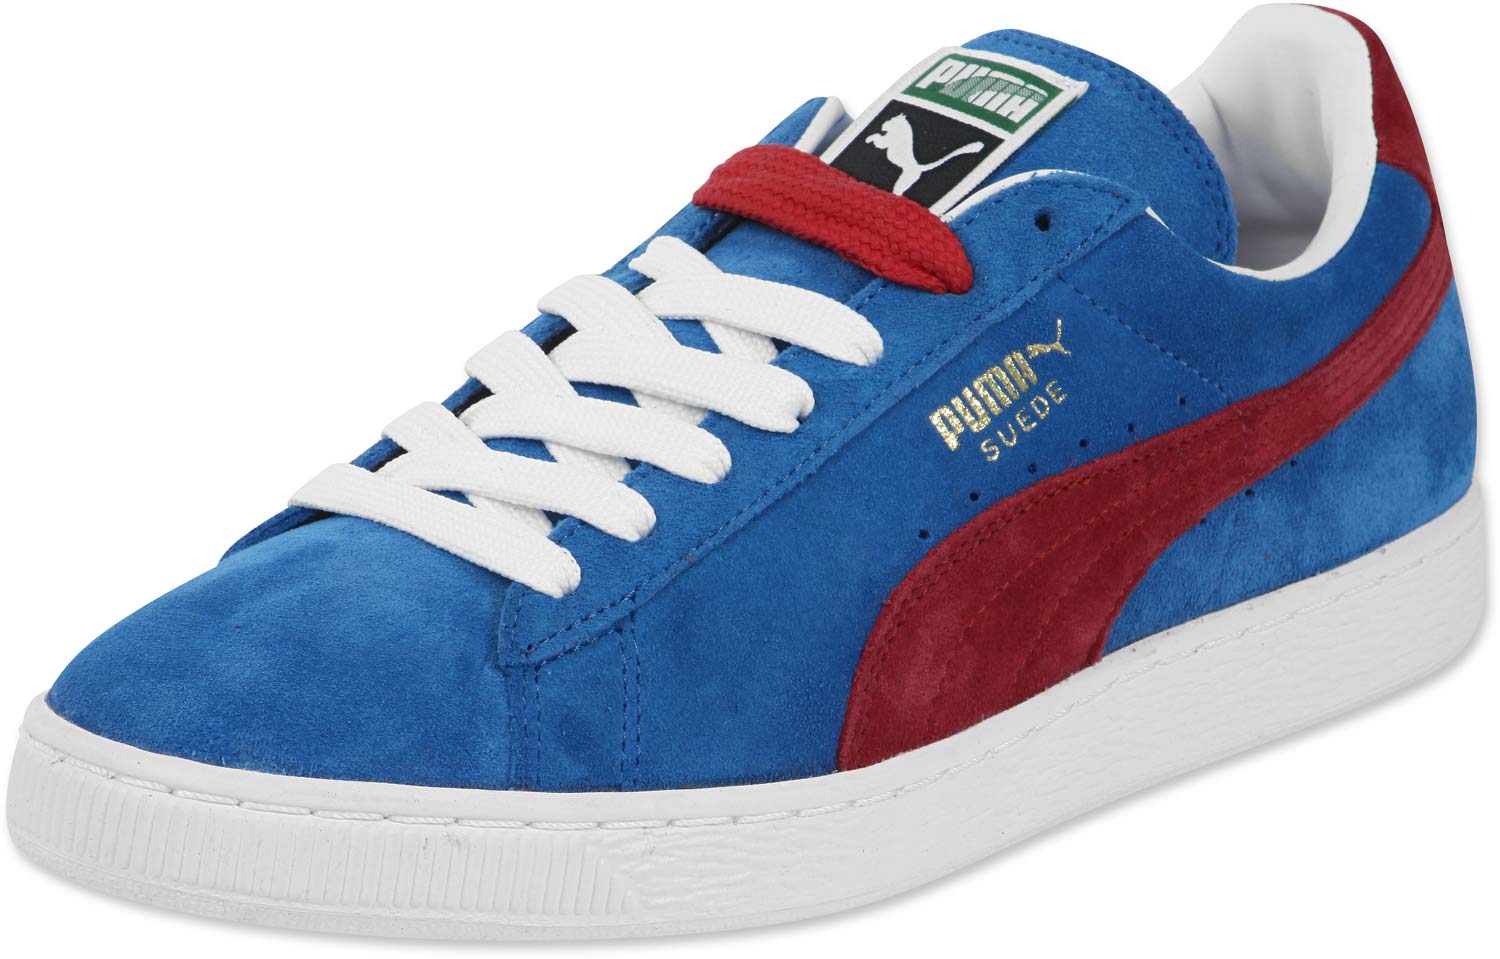 A Collection of Puma Suedes | Gallery